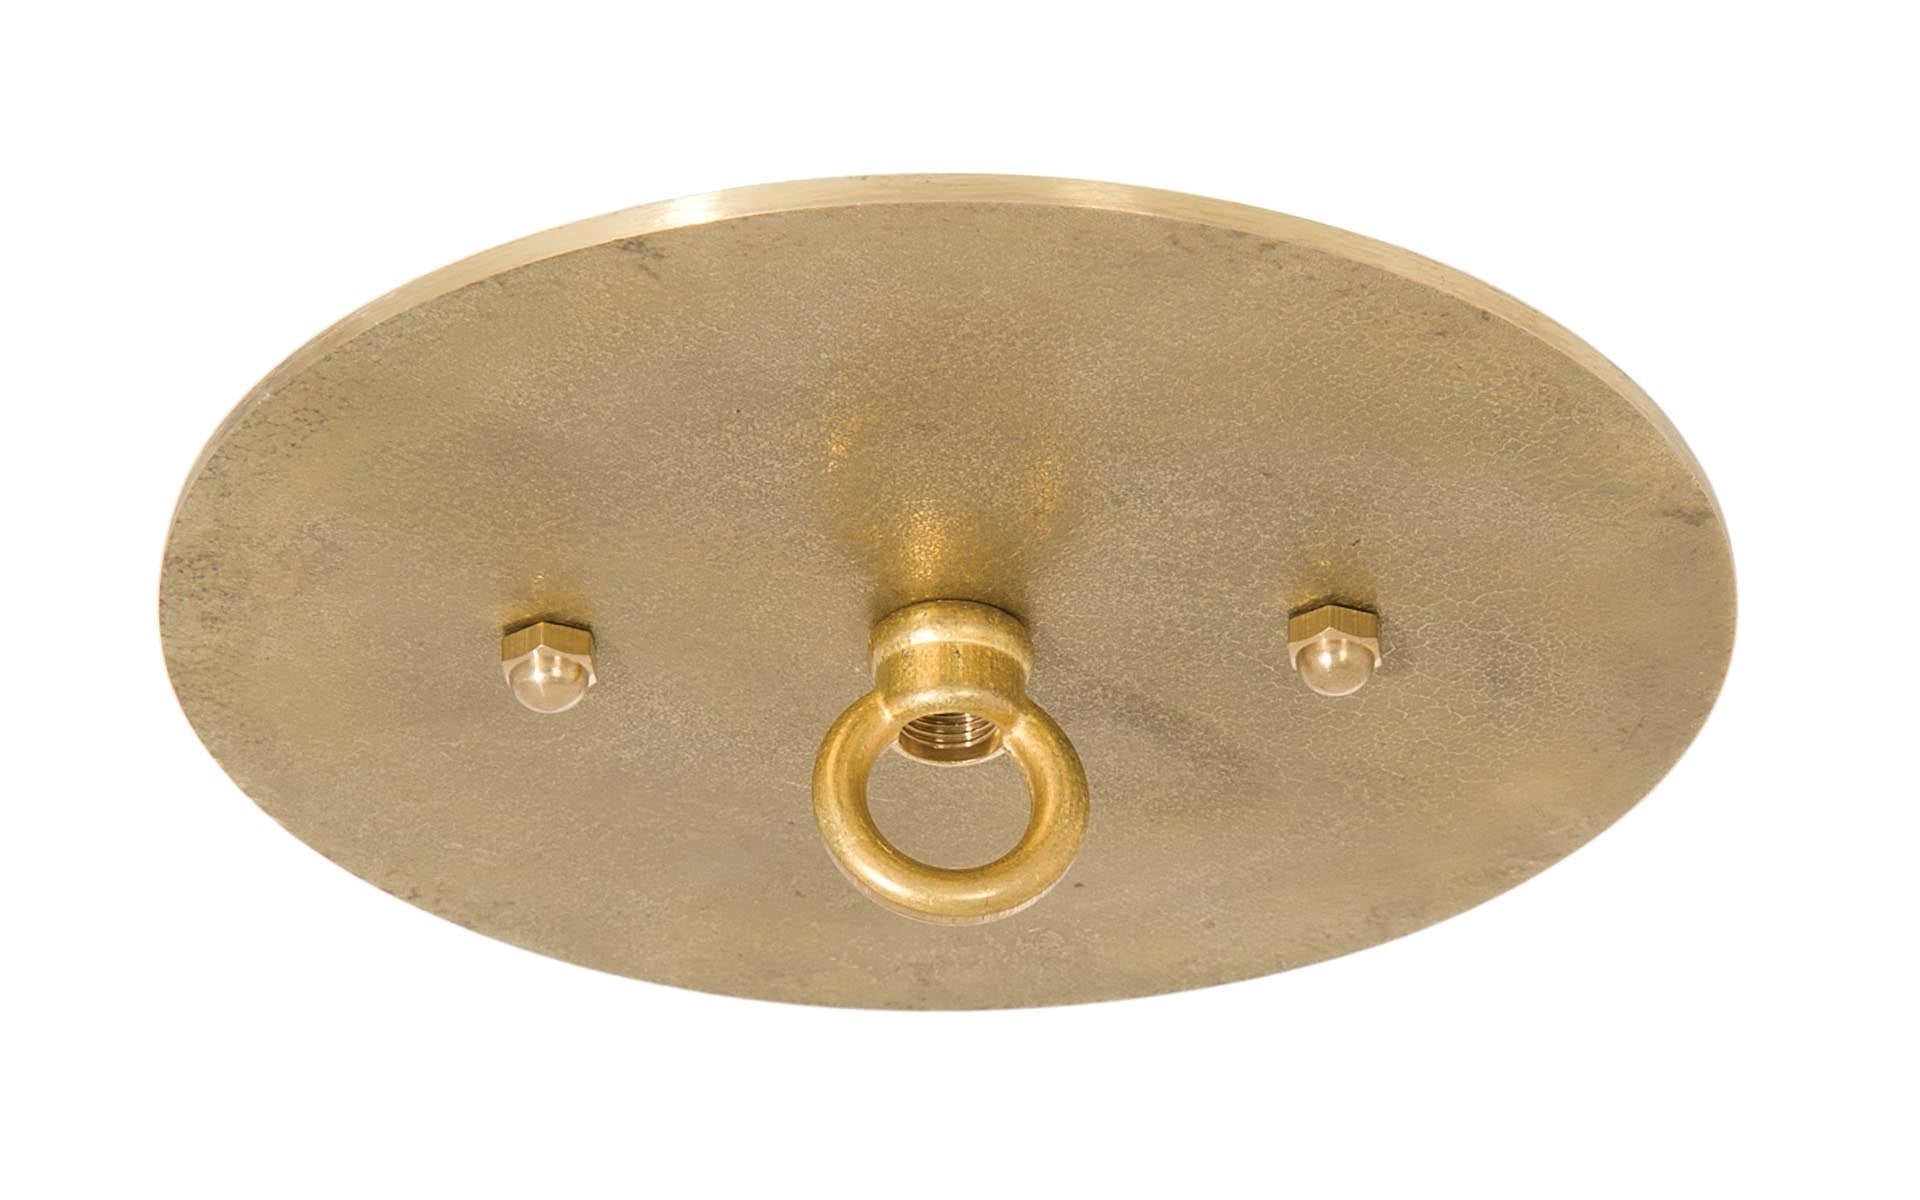 Flat Disk Style Versatile Die Cast Brass Ceiling Canopy with Mounting Hardware, Choice of Diameter